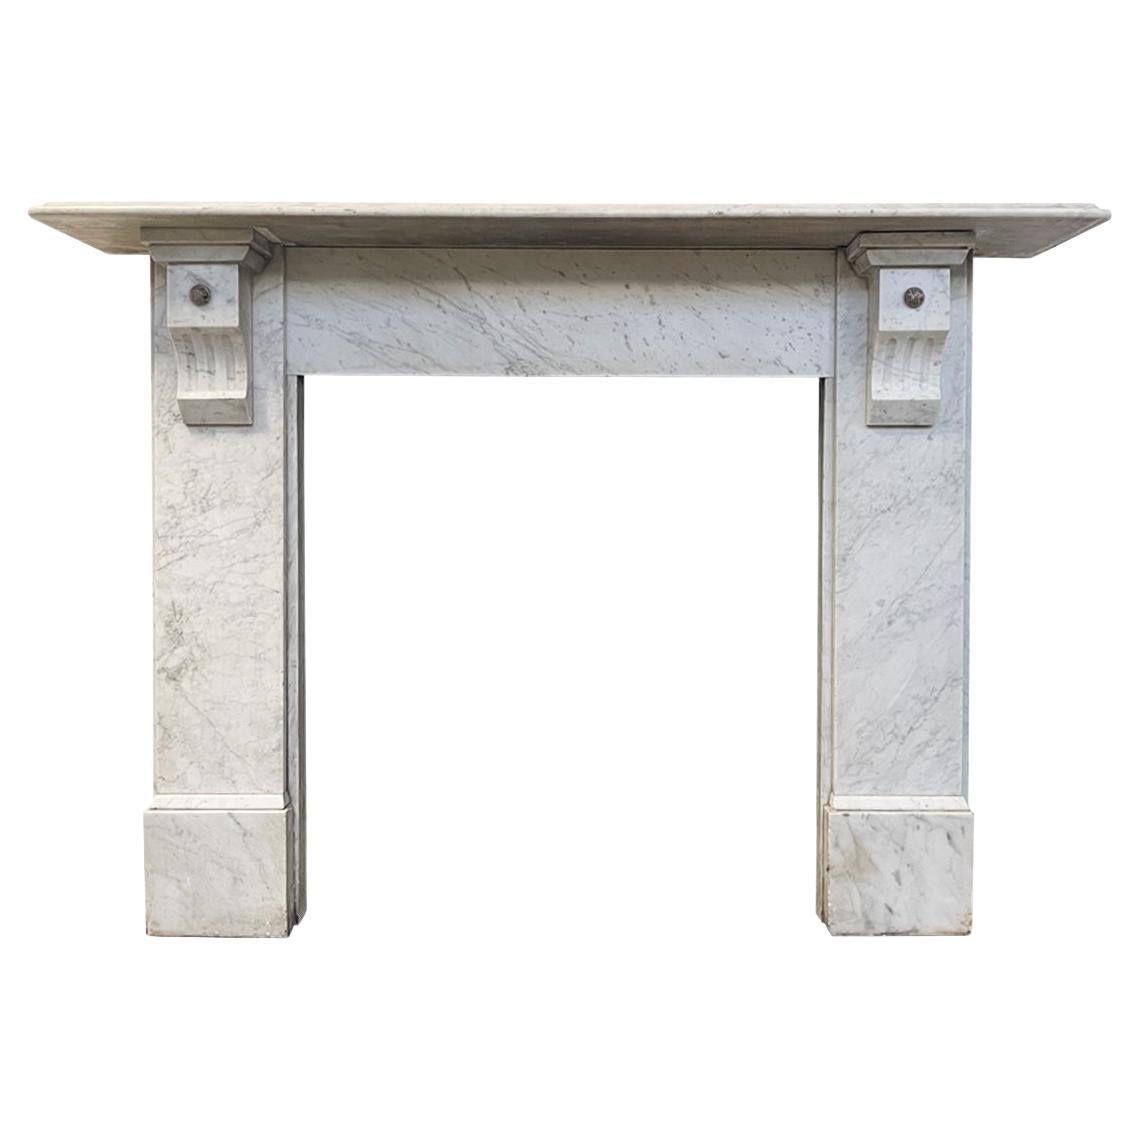 Reclaimed Victorian Corbelled Carrara Marble Fireplace Surround For Sale